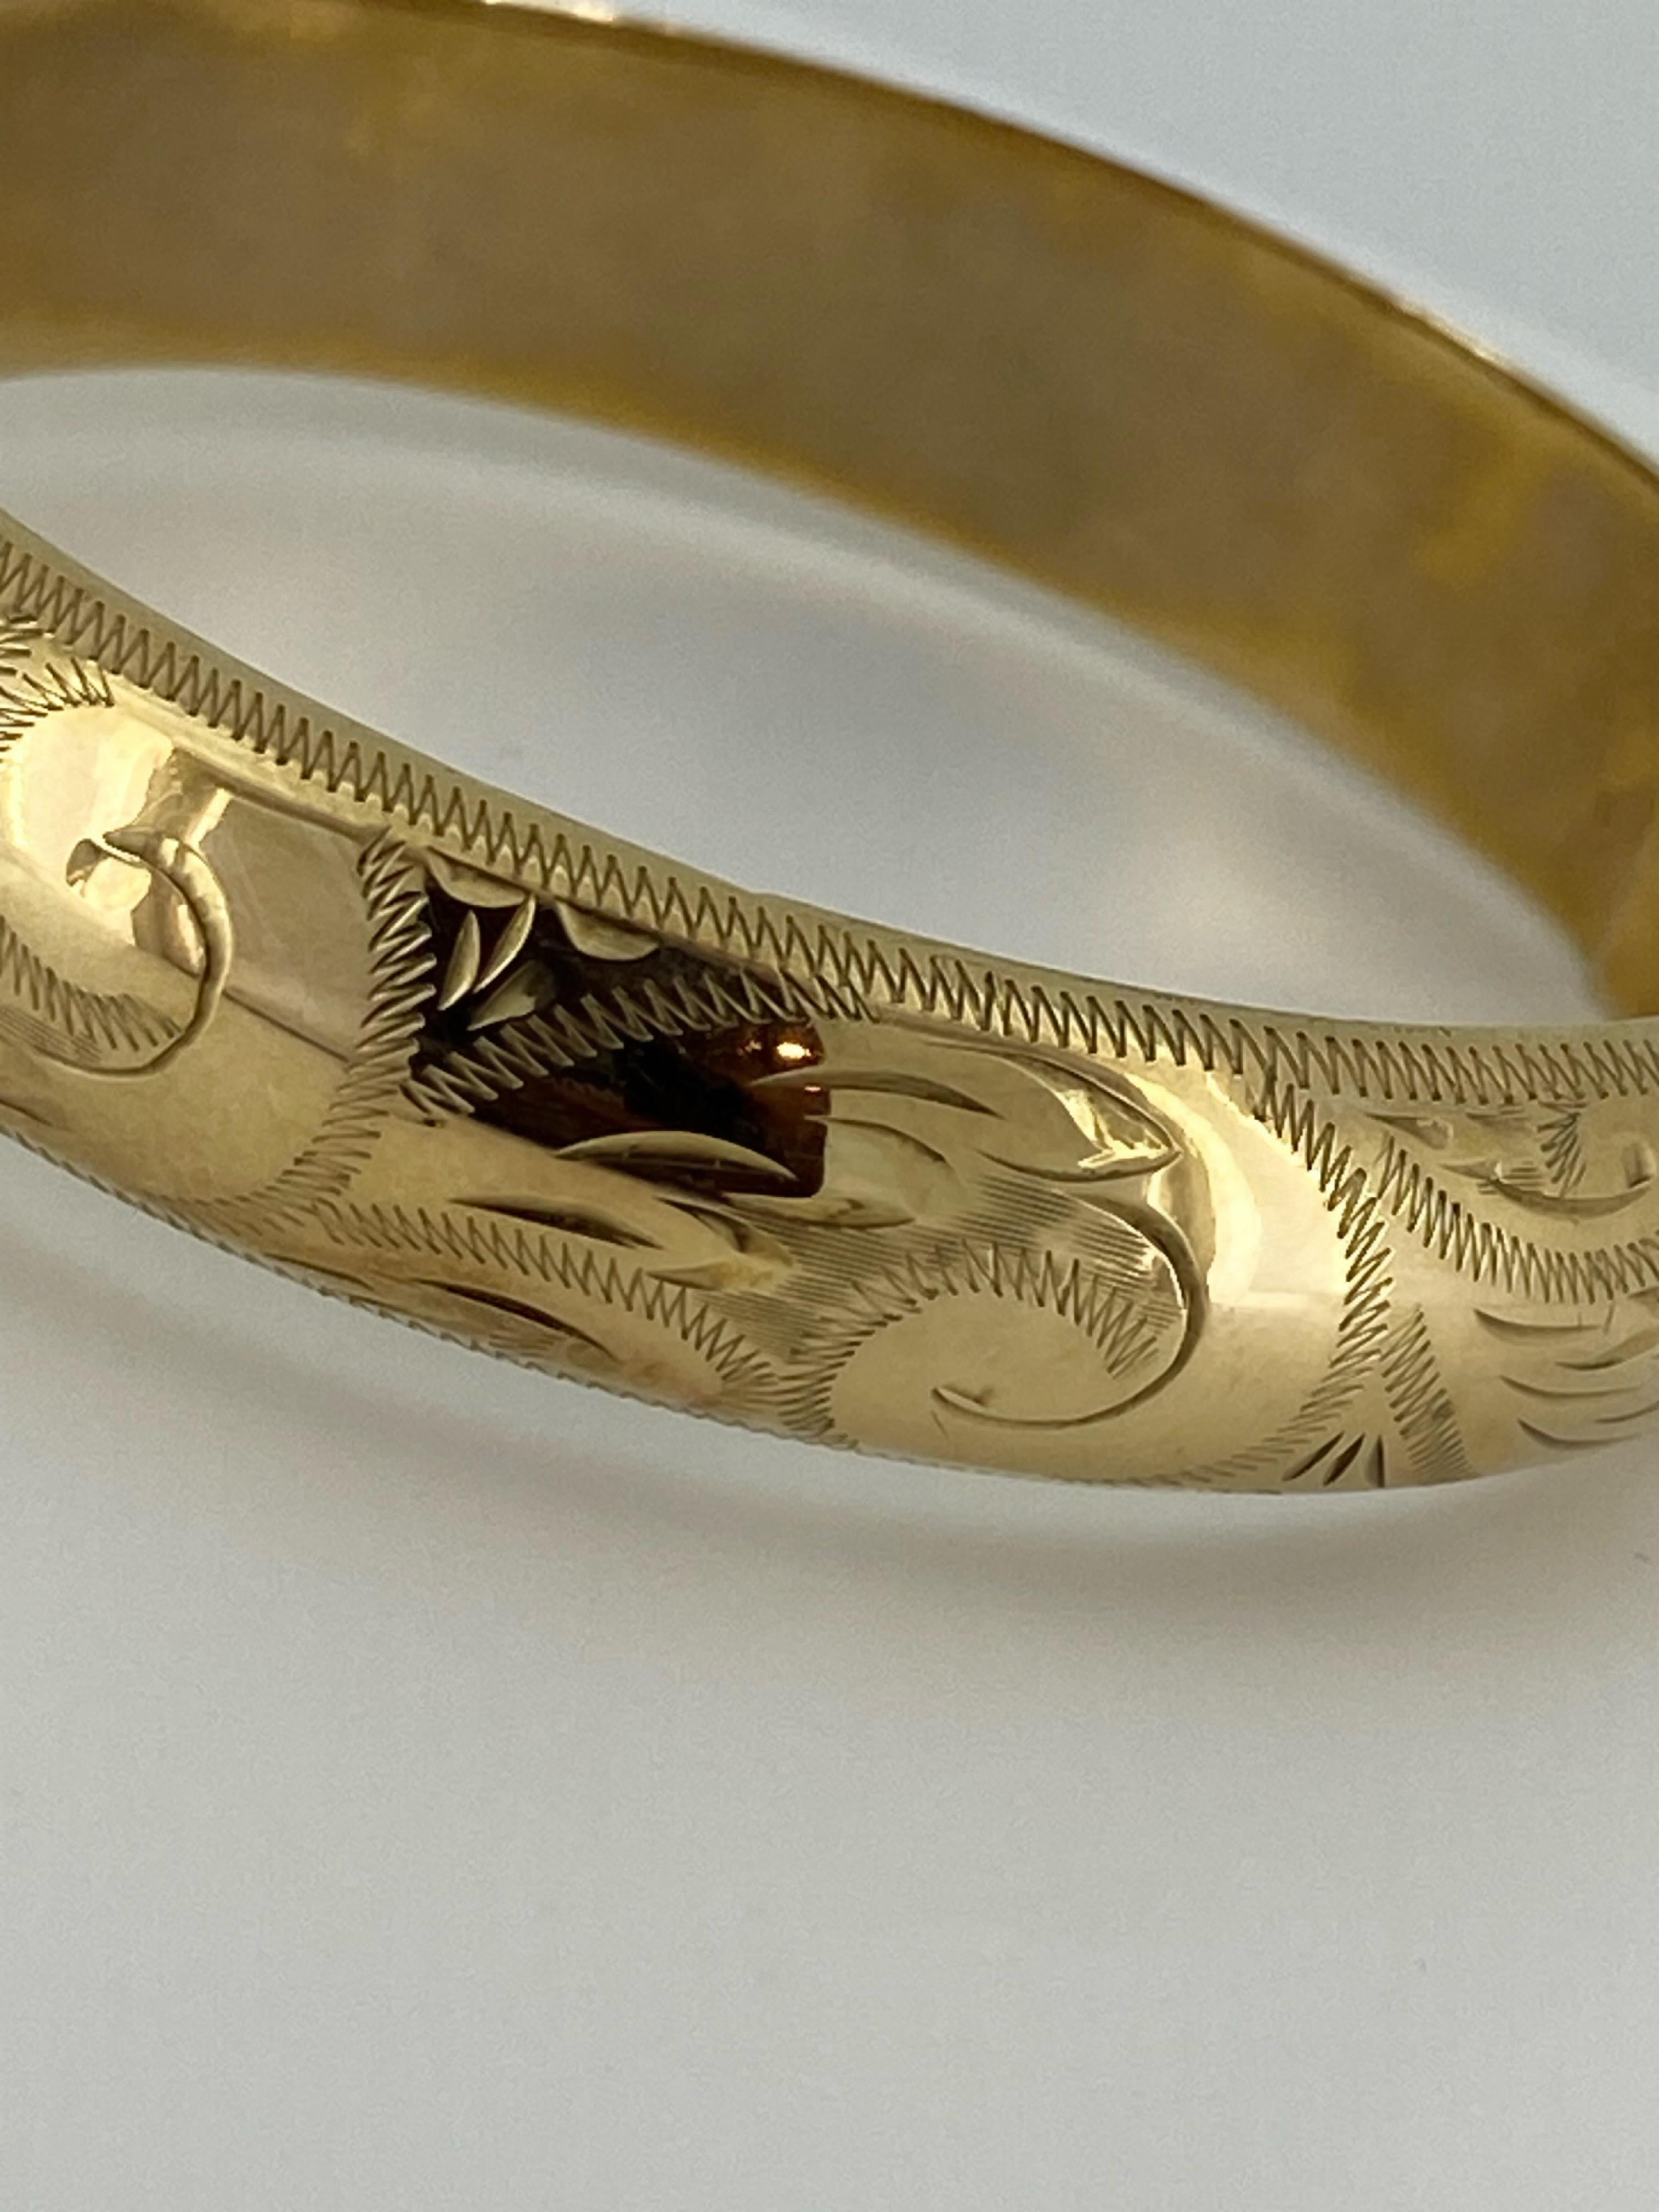 9K Yellow Gold Retro 1950's Finely Engraved Hinged Bangle. Circumference: 21cm. For Sale 5